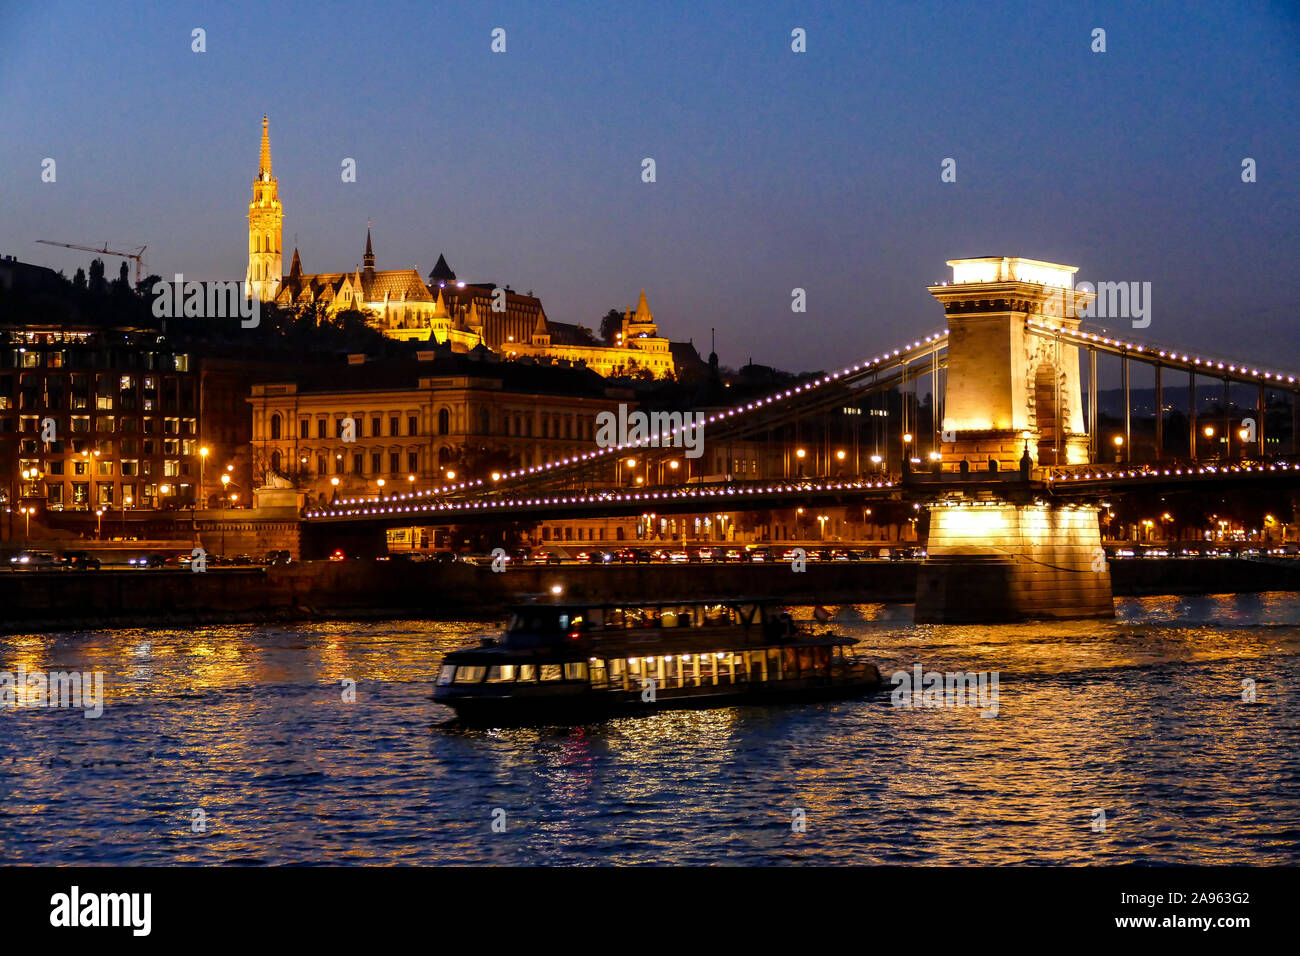 The chain bridge illuminated at night with Buda castle and the spire of Matthias Church in the background Stock Photo